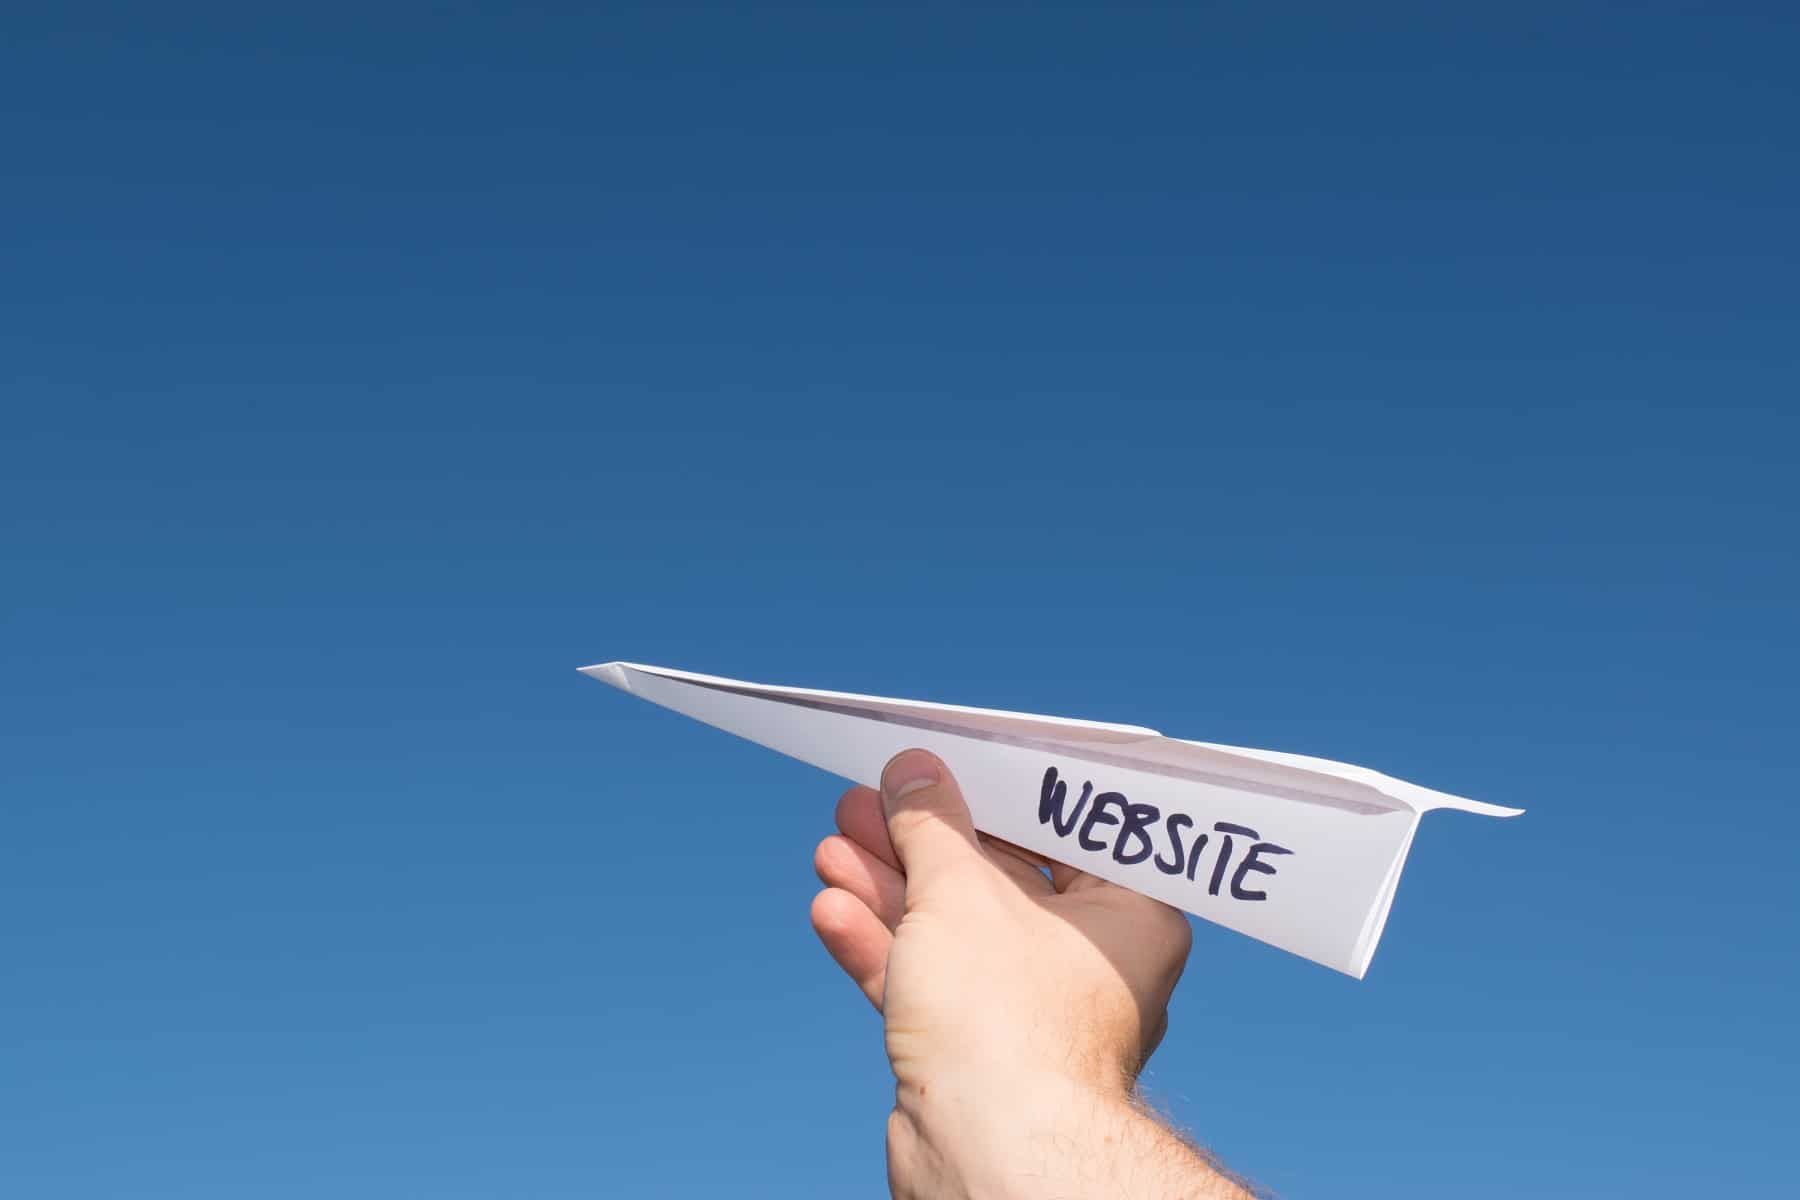 paper airplane with the word "website" - launch a new website redesign